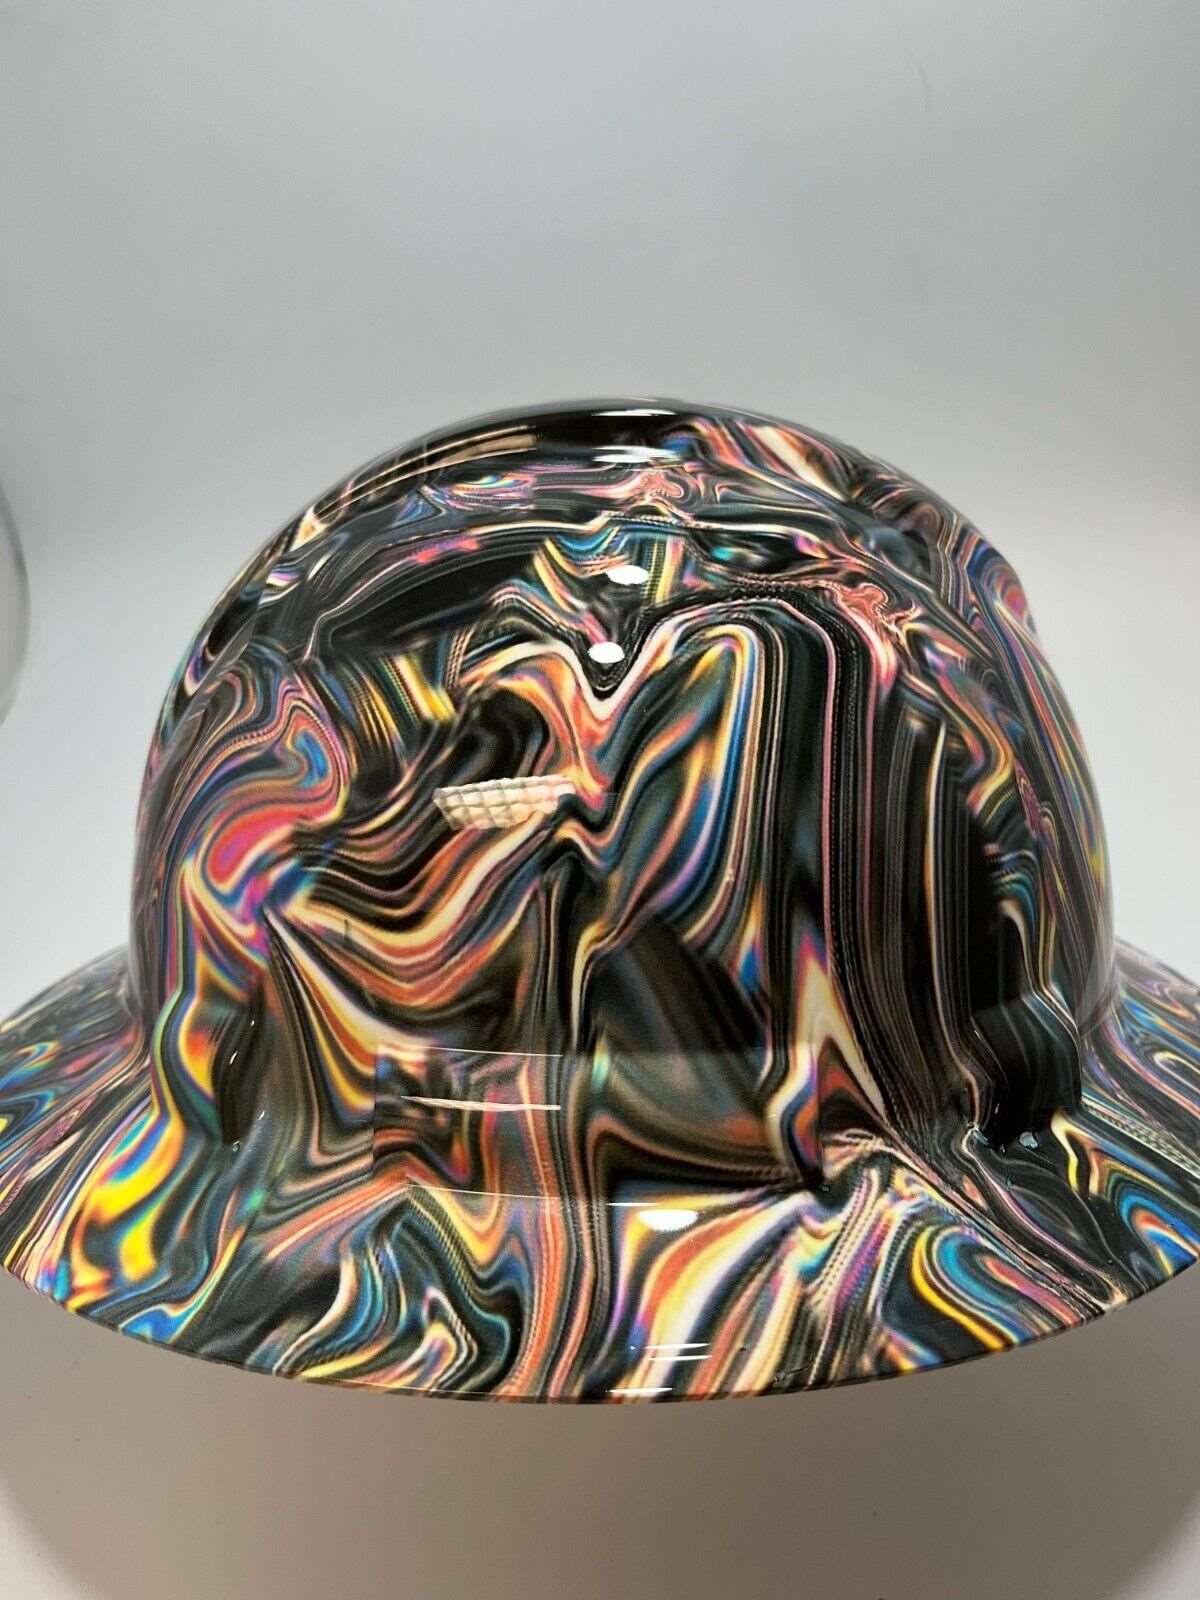 Badass hard hat with a Hydro dipped design 